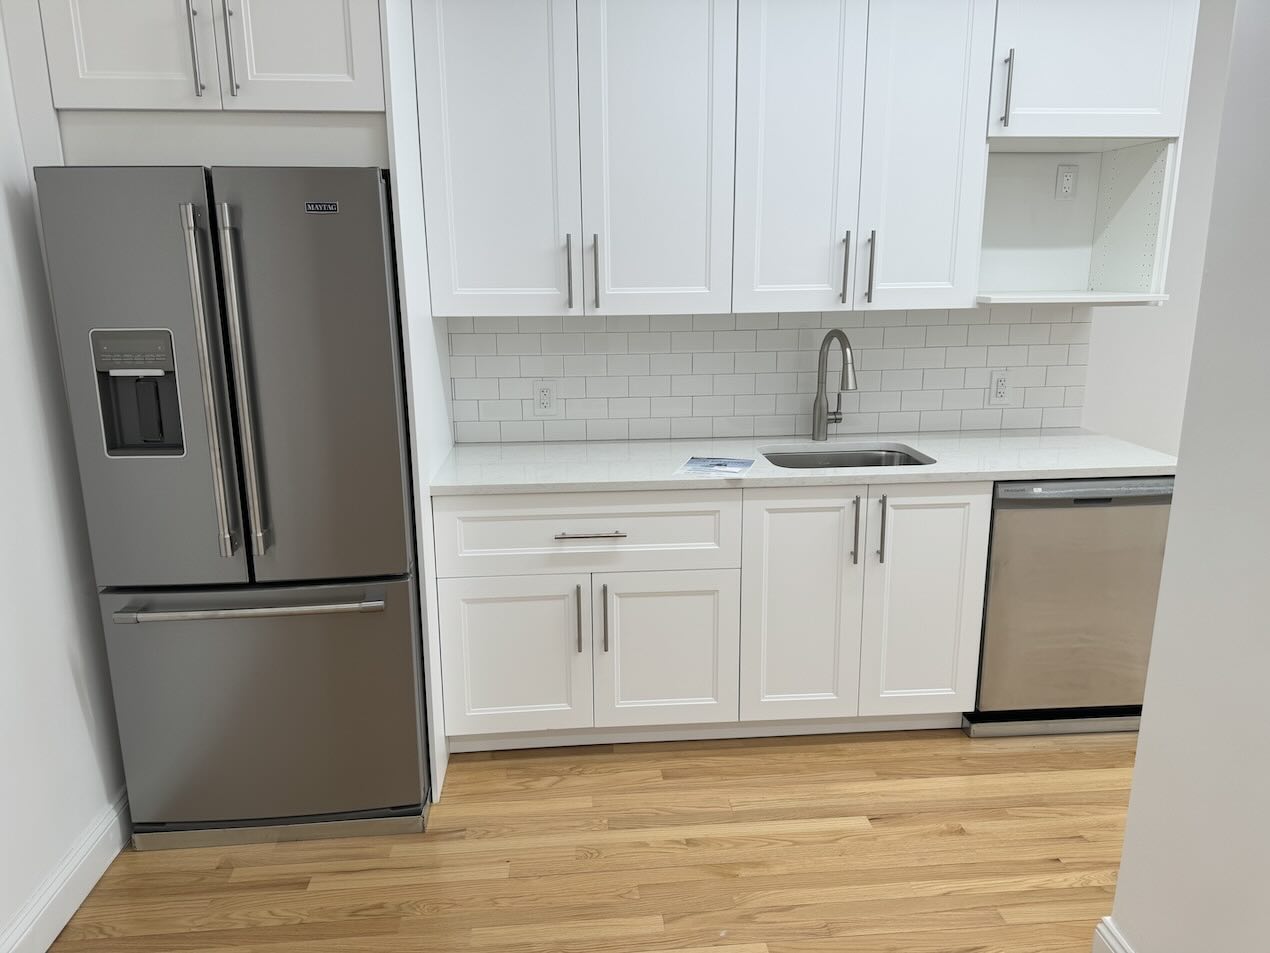 37 West 20th Street Loft Office Space - Kitchen with Refrigerator and Diswasher